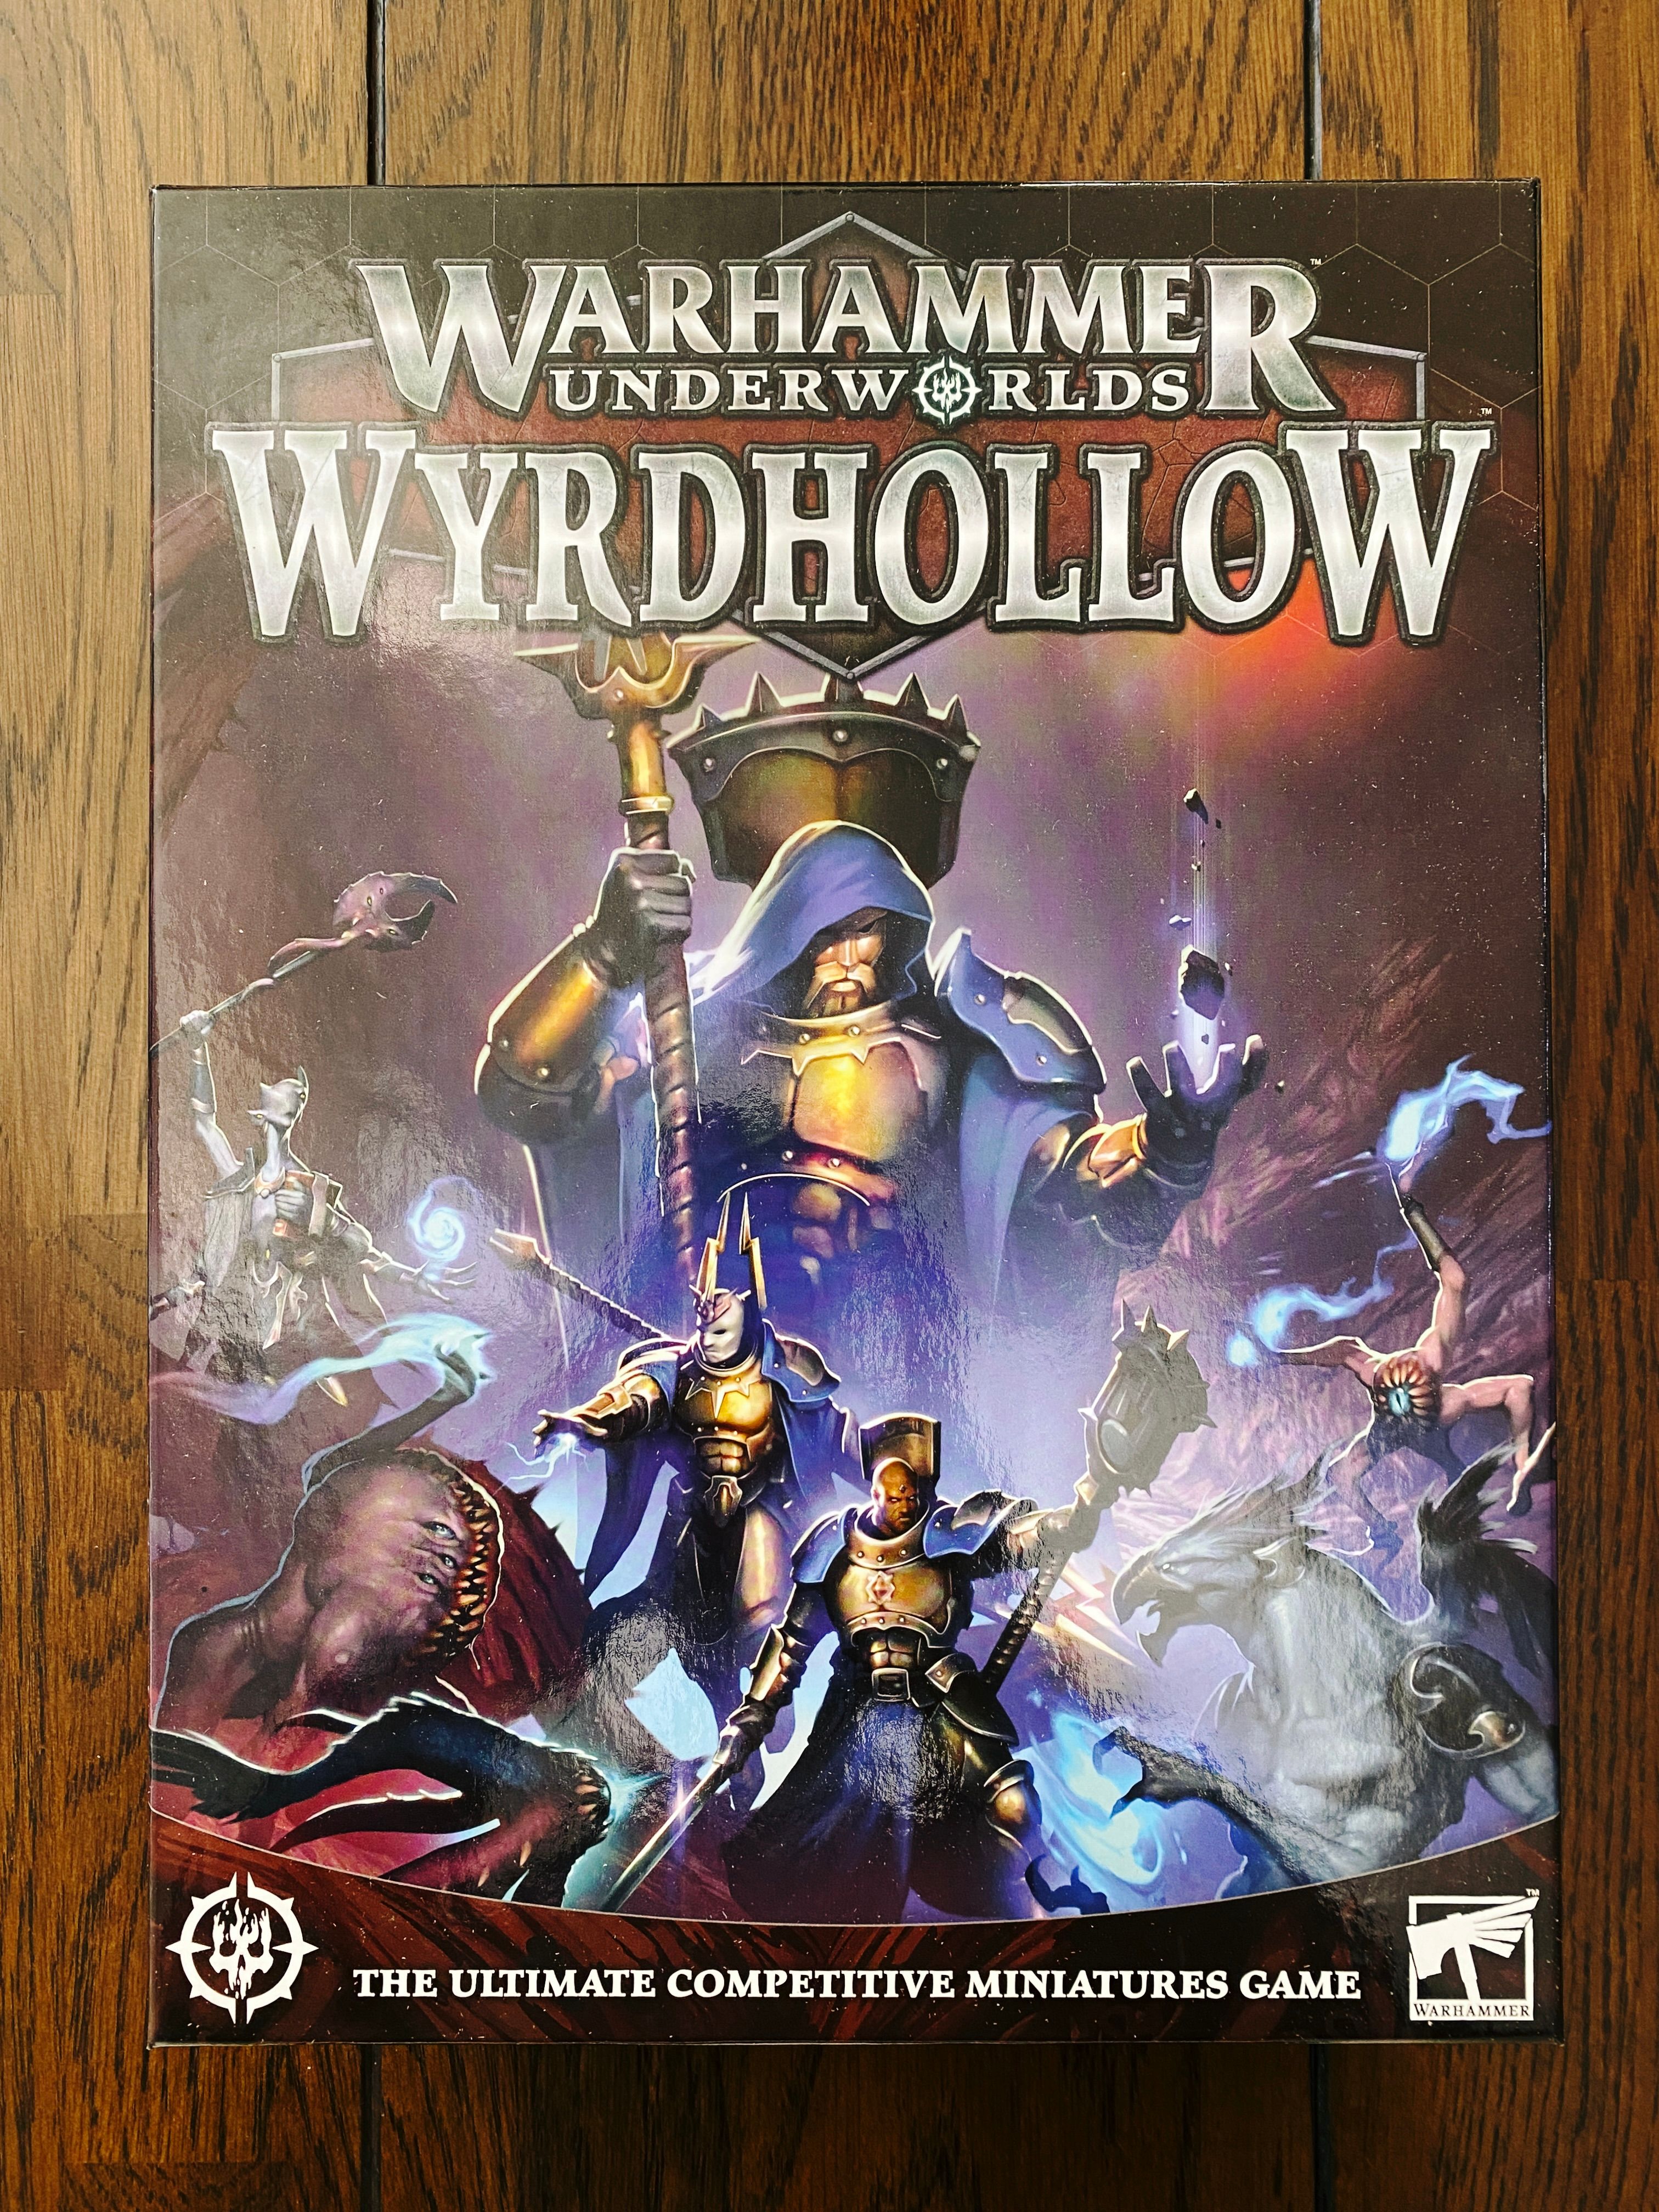 A photo of the front of the box of the new Warhammer Underworlds release. The artwork has a guy in golden armour with a big blue cloak with a hood standing there with a staff and casting some sort of magic, and below that are two more similar figures fighting off freaky-looking misshapen daemons.